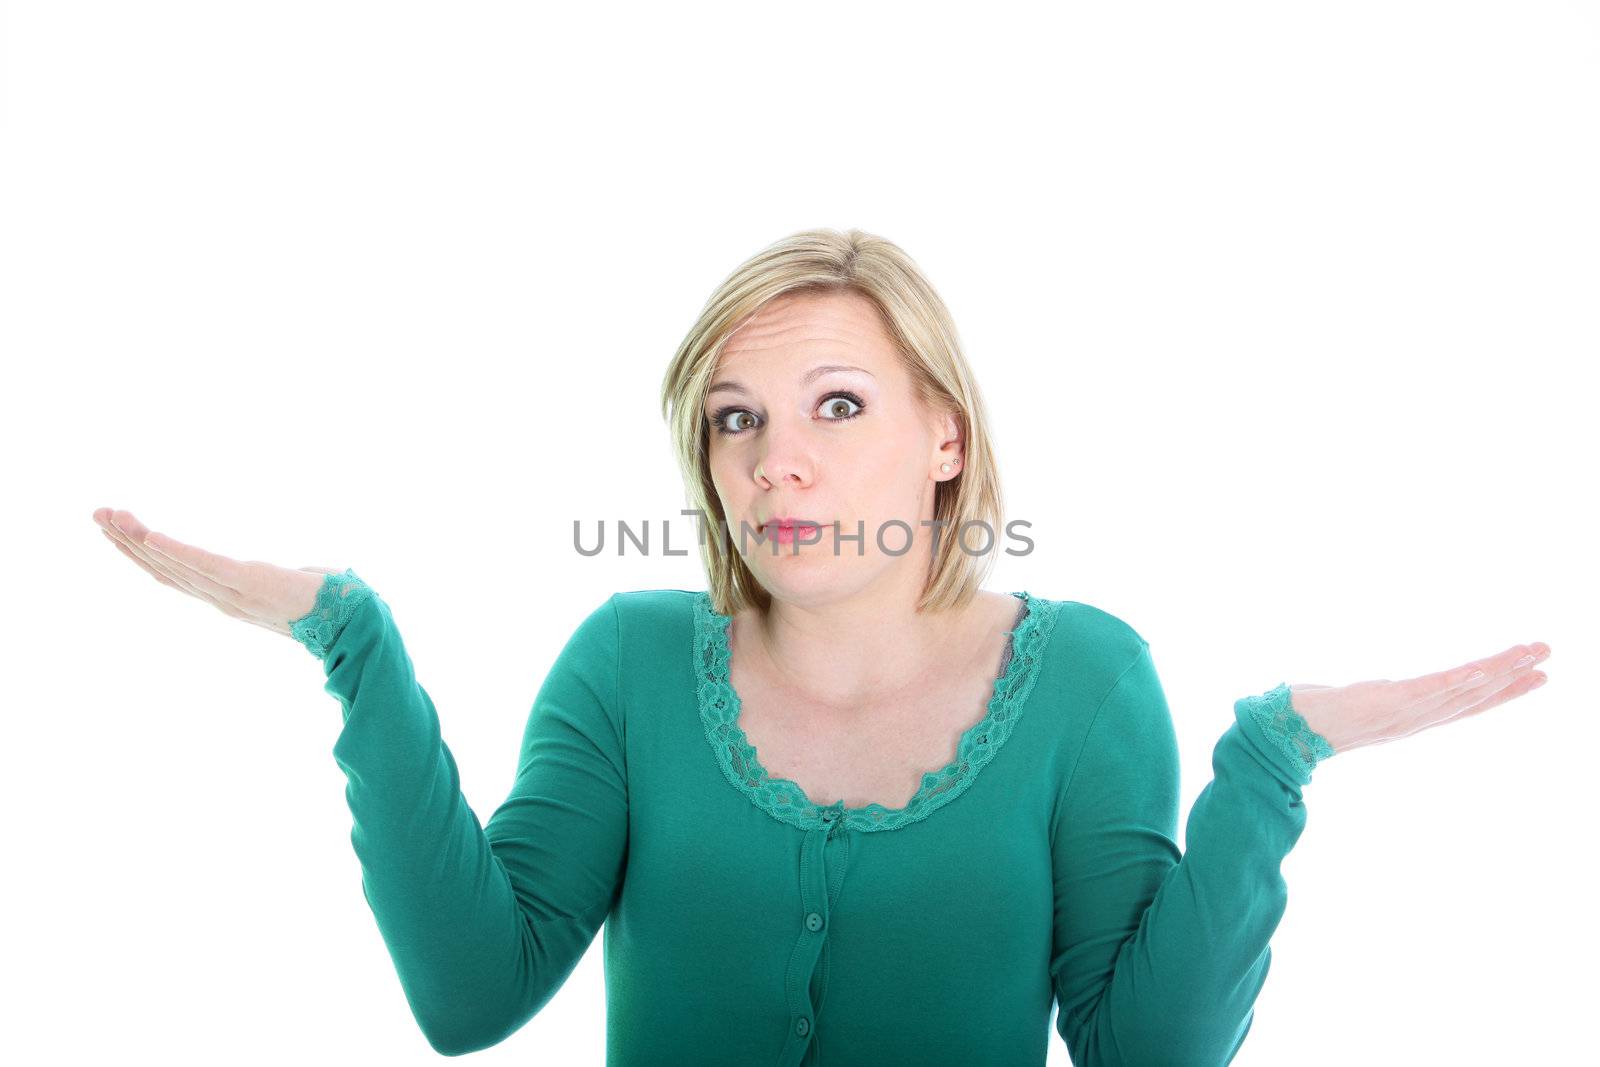 Ignorant young blonde woman with a wide eyed expression shrugging her shoulders in ignorance or indifference isolated on white